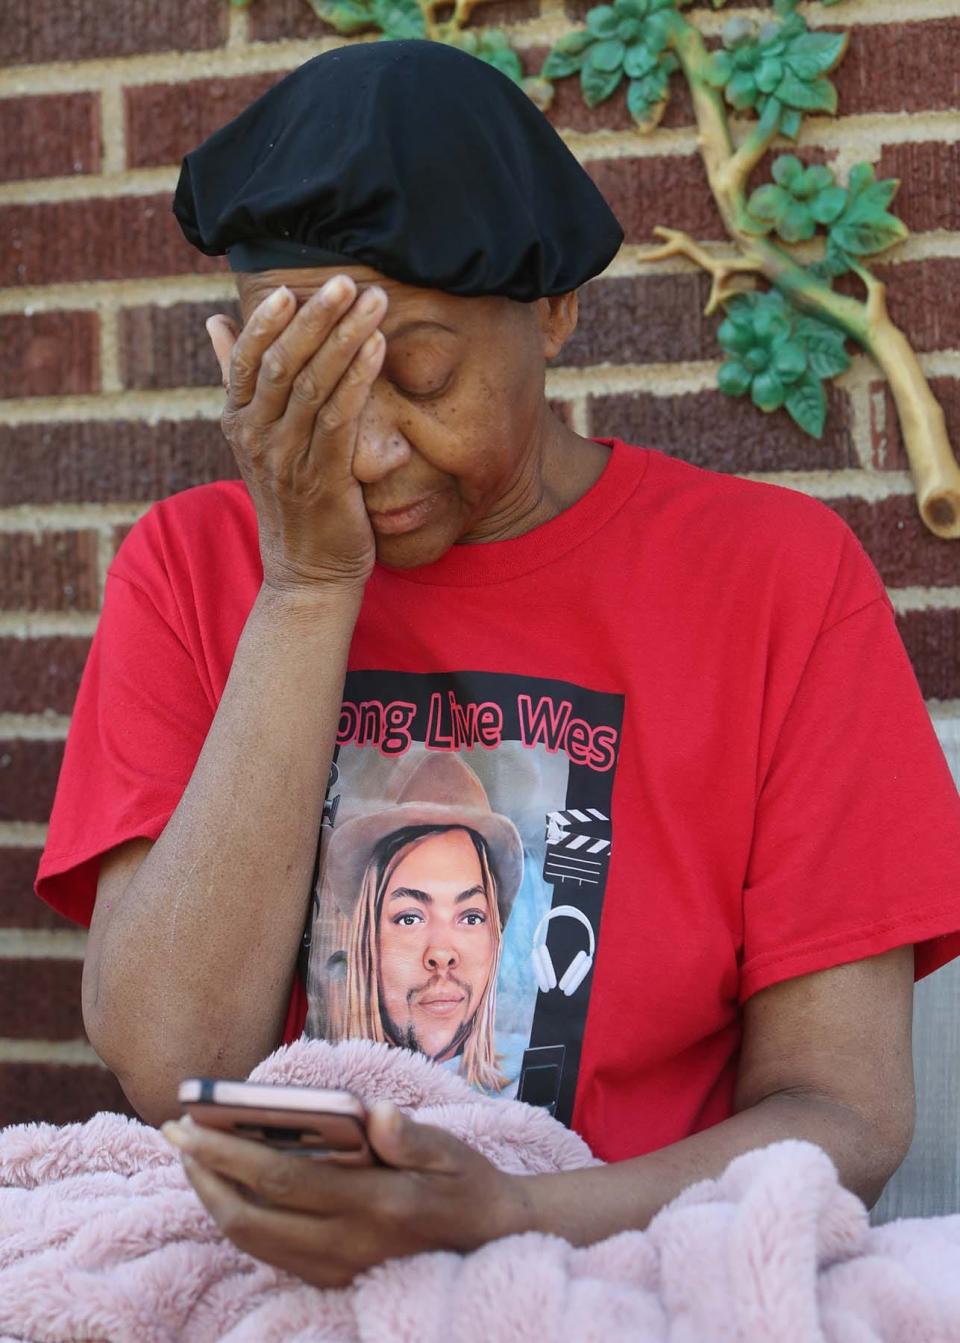 Rebecca Shepard reacts to dealing with the automated FedEx customer service phone system as she tries to get information about missing packages containing the belongings of her Wesley Shepard, 33, who recently died in Los Angeles.